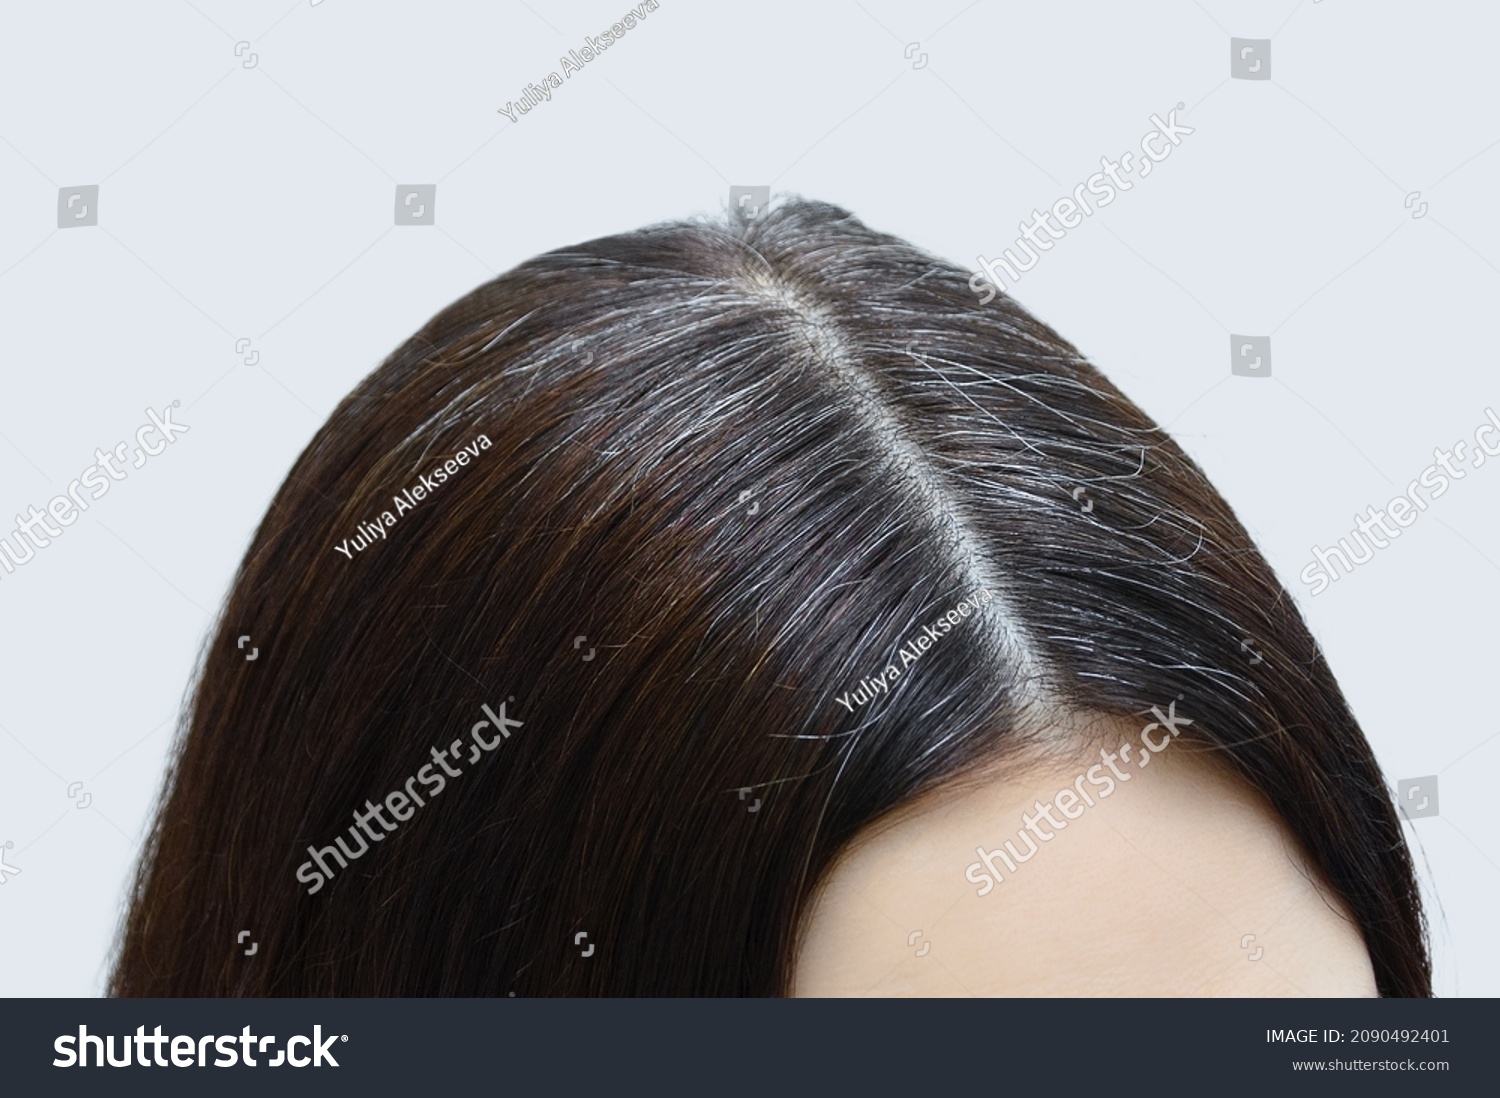 Gray hair on the crown of a Caucasian woman close-up. #2090492401